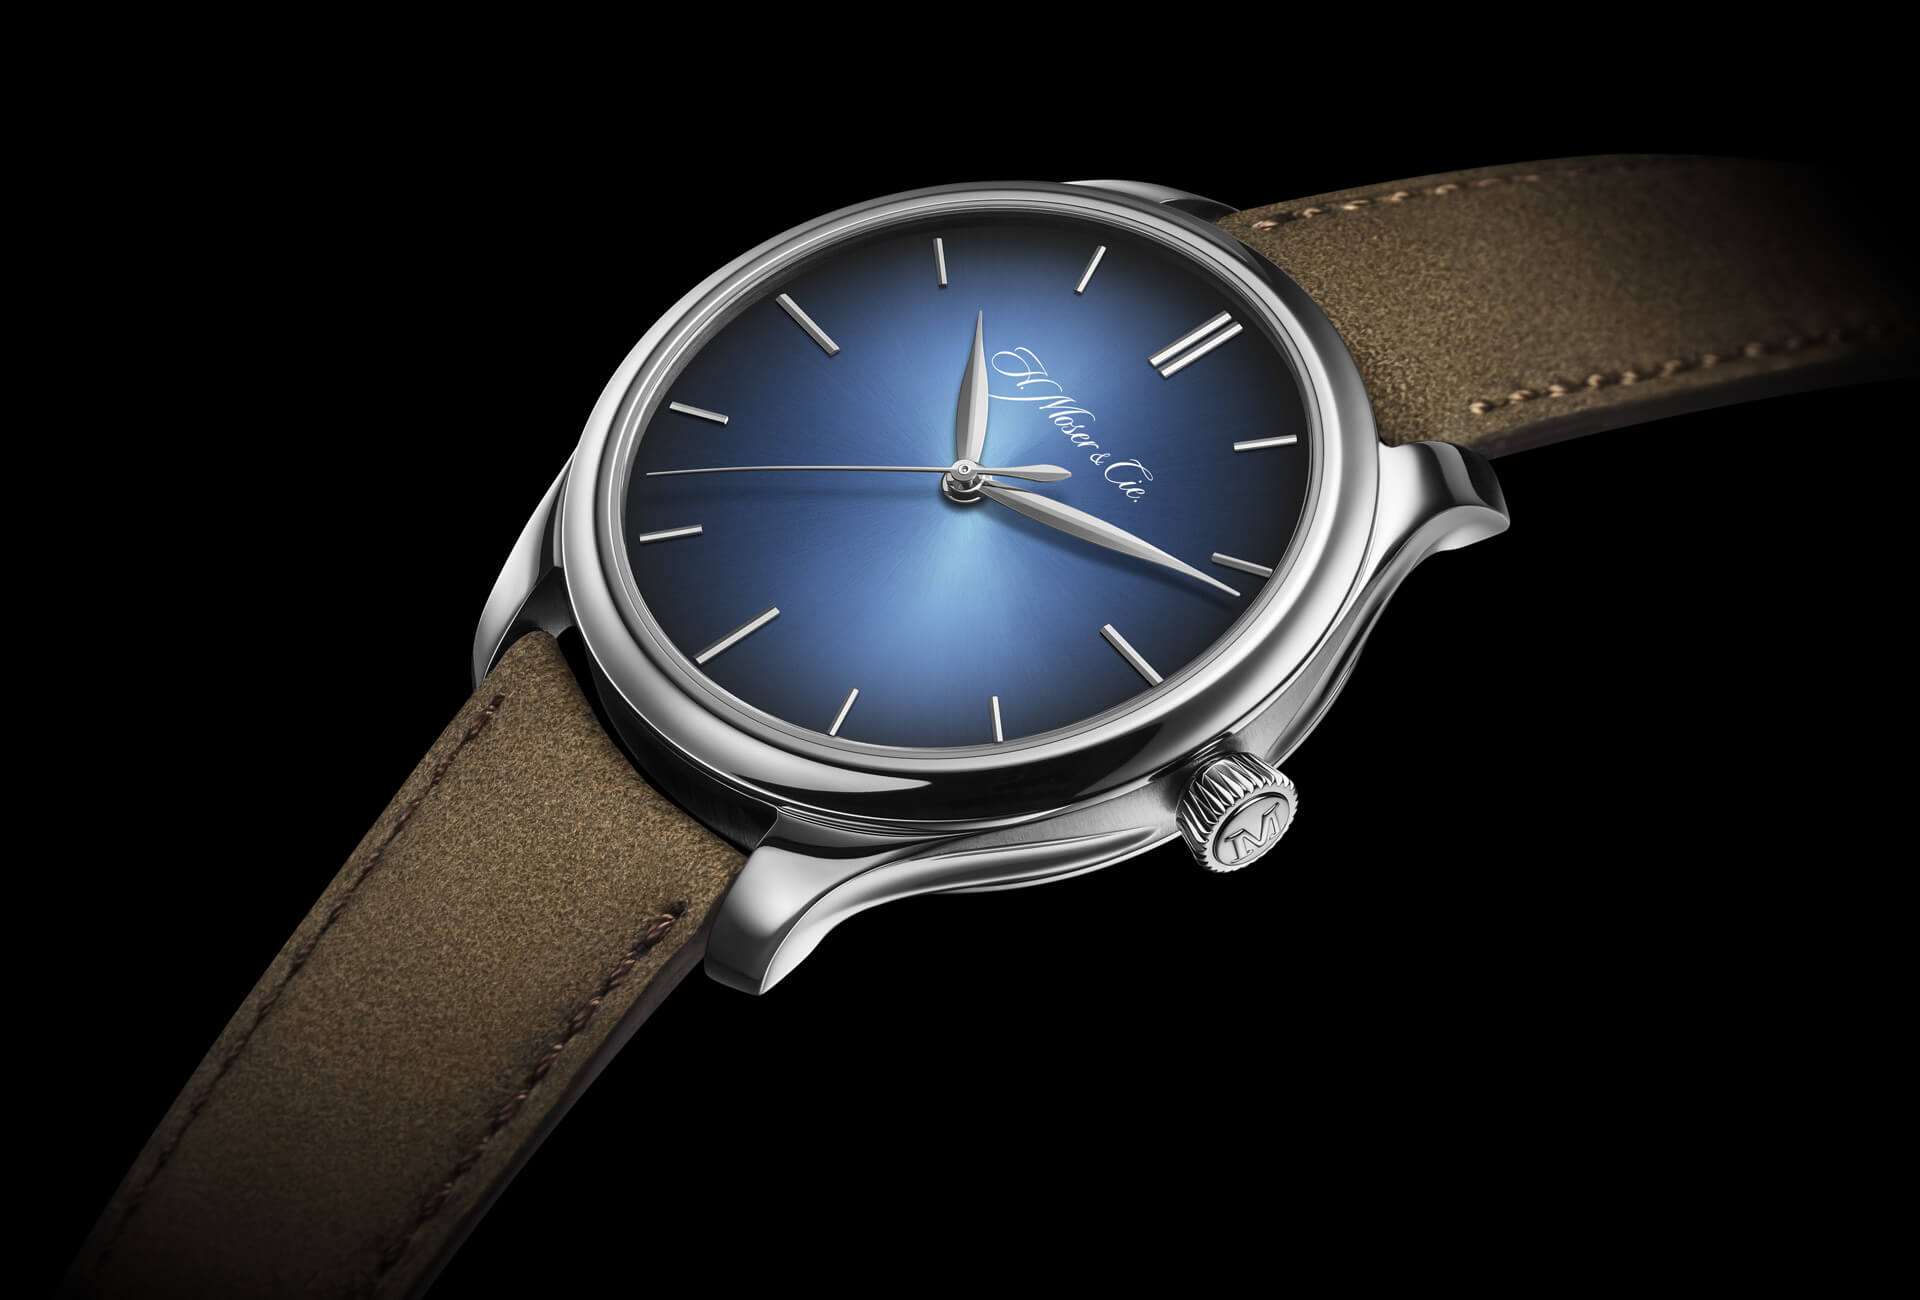 H. Moser & Cie – Keep it simple – FHH Journal